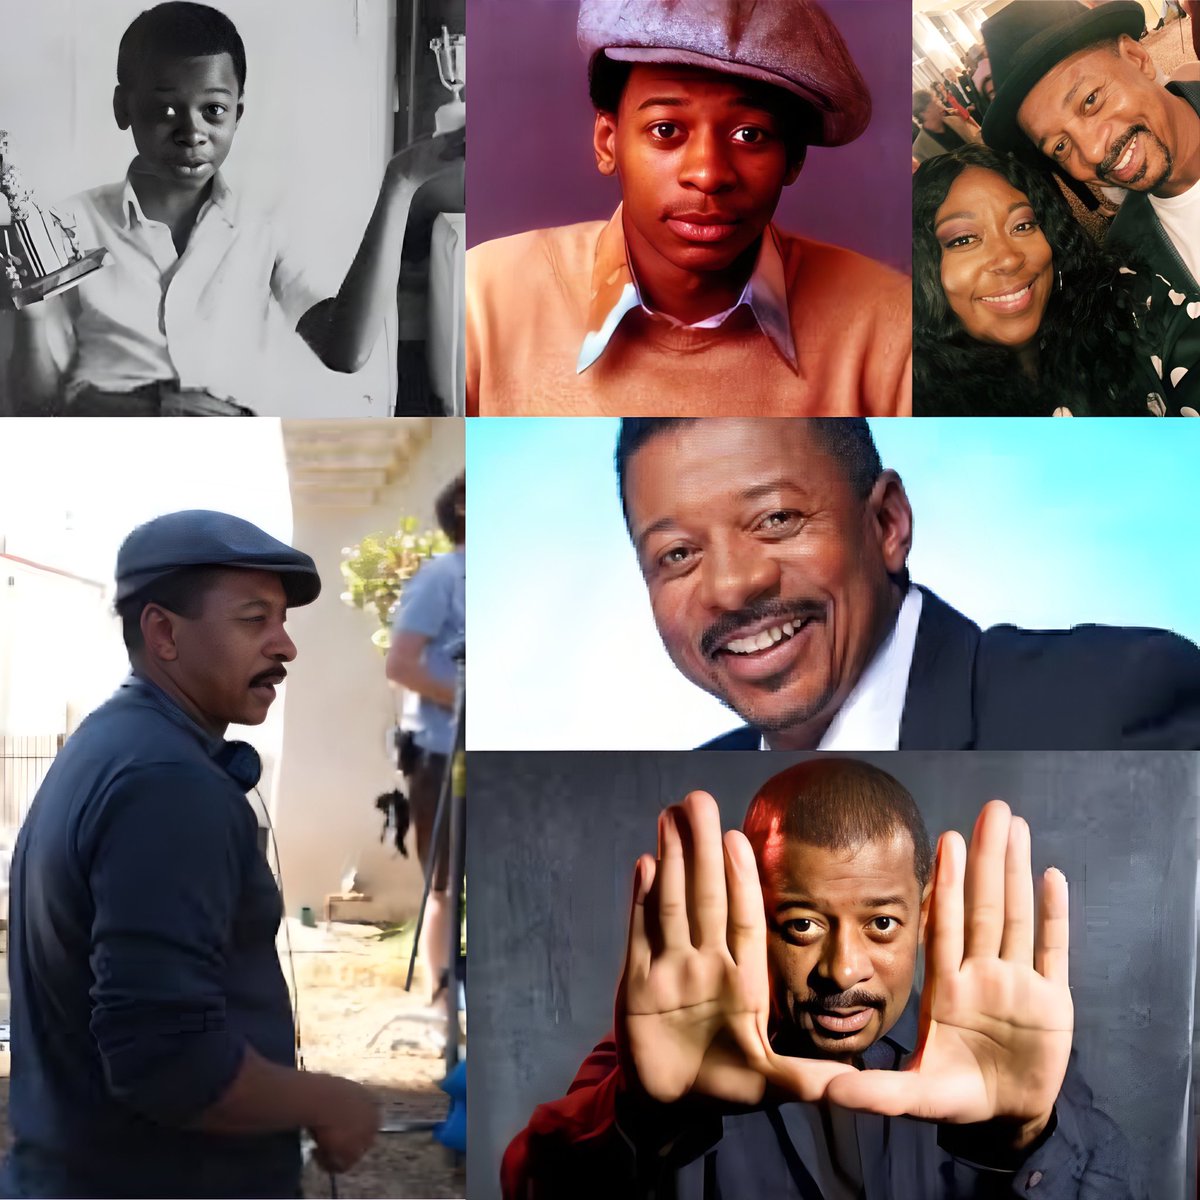 One of the nicest men in Hollywood.. it’s his birthday!!!  #RobertTownsend is best known for directing the films Hollywood Shuffle (1987), Eddie Murphy Raw (1987), The Meteor Man (1993), The Five Heartbeats (1991) enjoy your day King!!! #blackhistorymonth